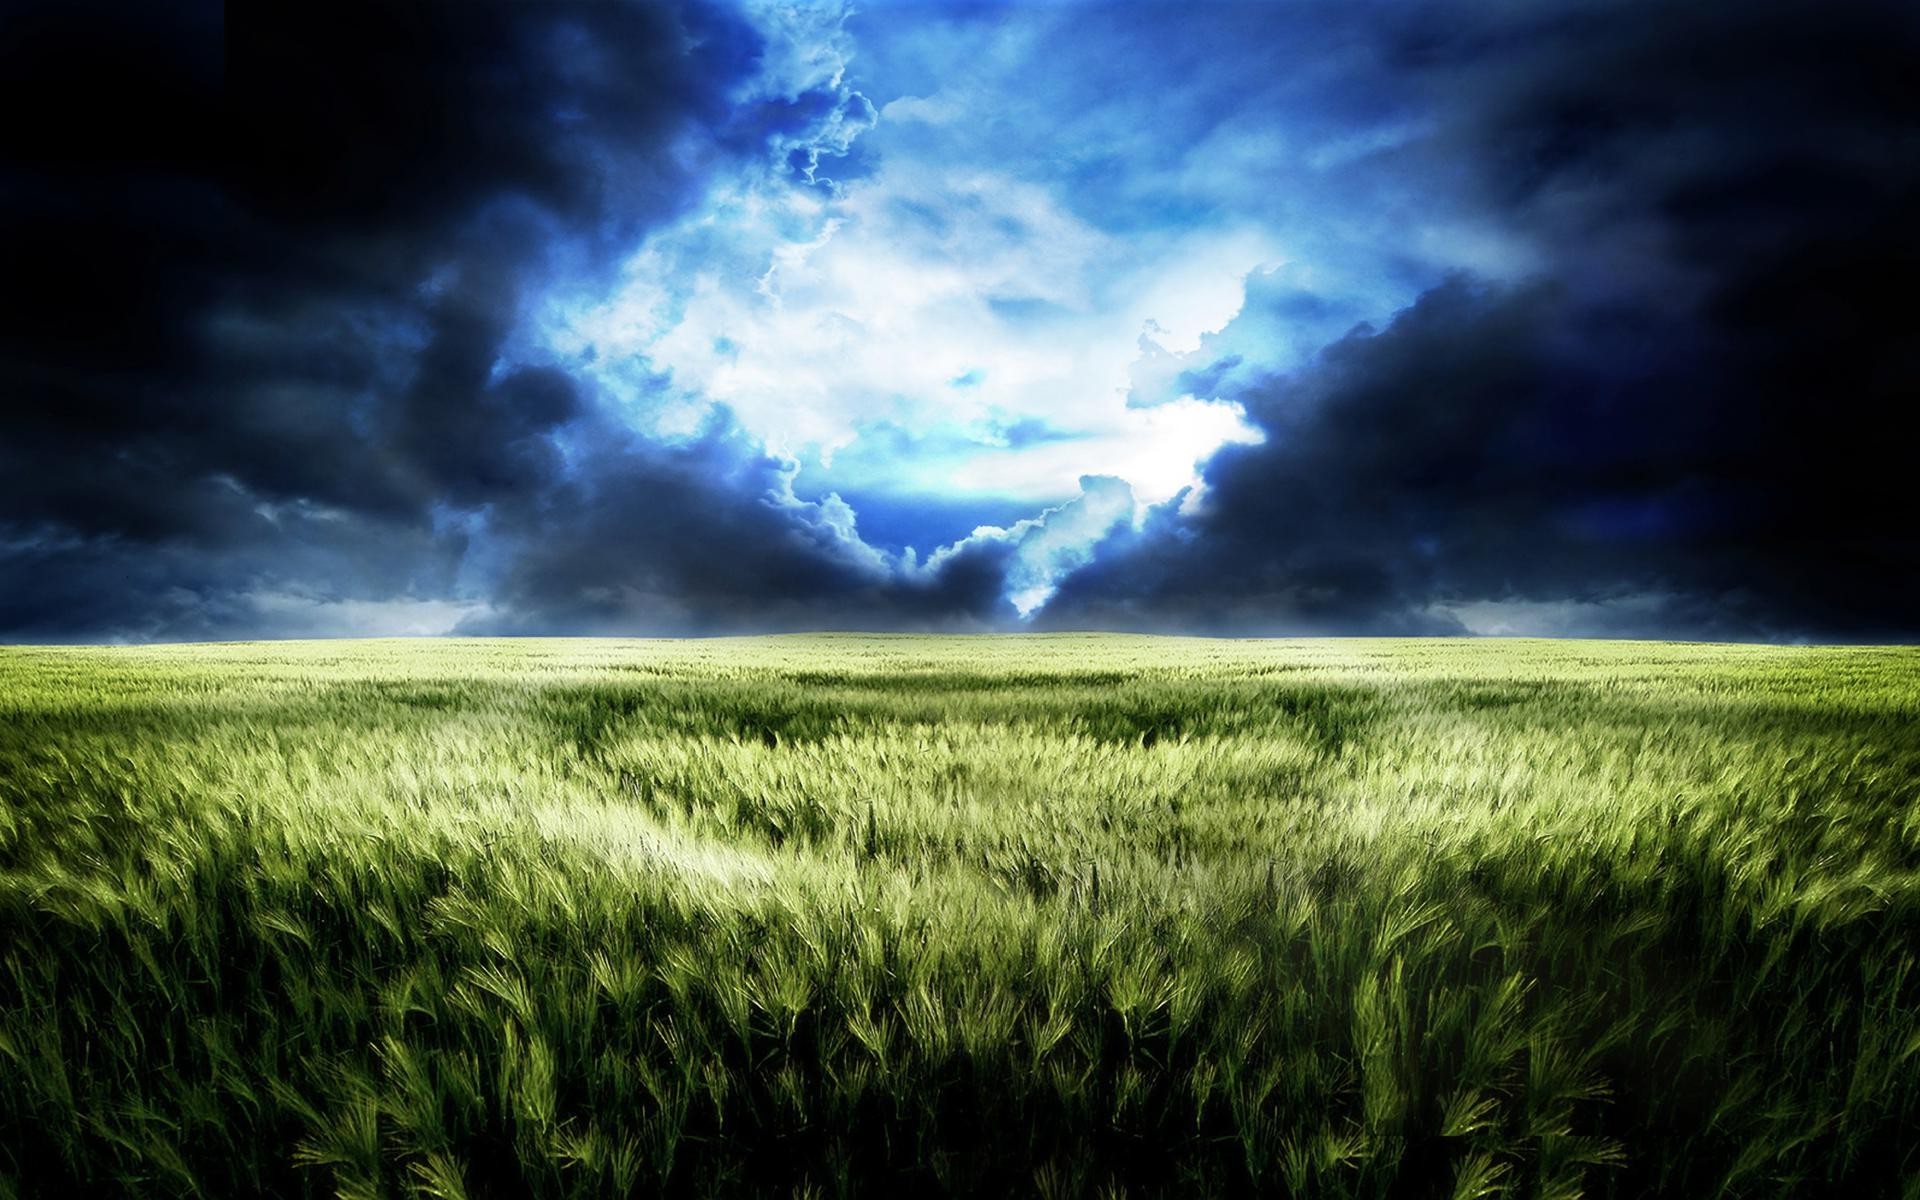 Storm clouds over wheat field wallpaper 6198